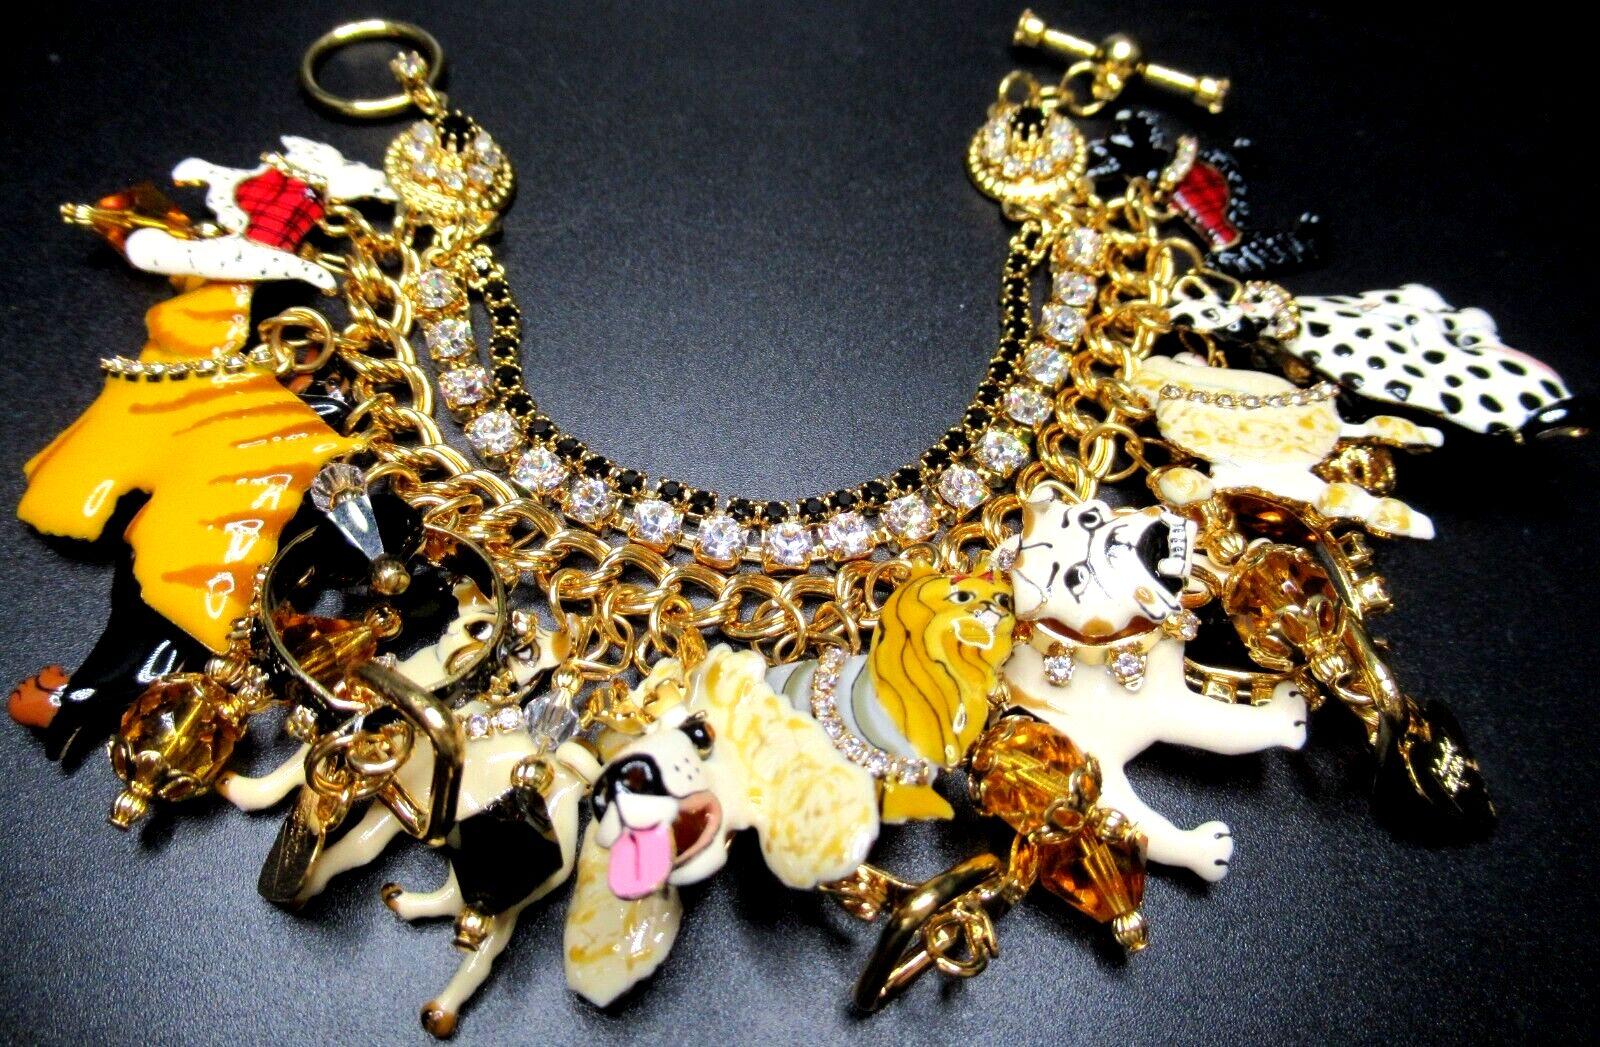 Simply Beautiful! Oscar worthy Iconic LUNCH AT THE RITZ Kennel Club Sparkling Crystal and Enamel Red Carpet Charm Bracelet. Double row Sparkling Crystal Bracelet, suspending numerous a Kennel Club of adorable Dogs. Gold tone mounting. Bracelet